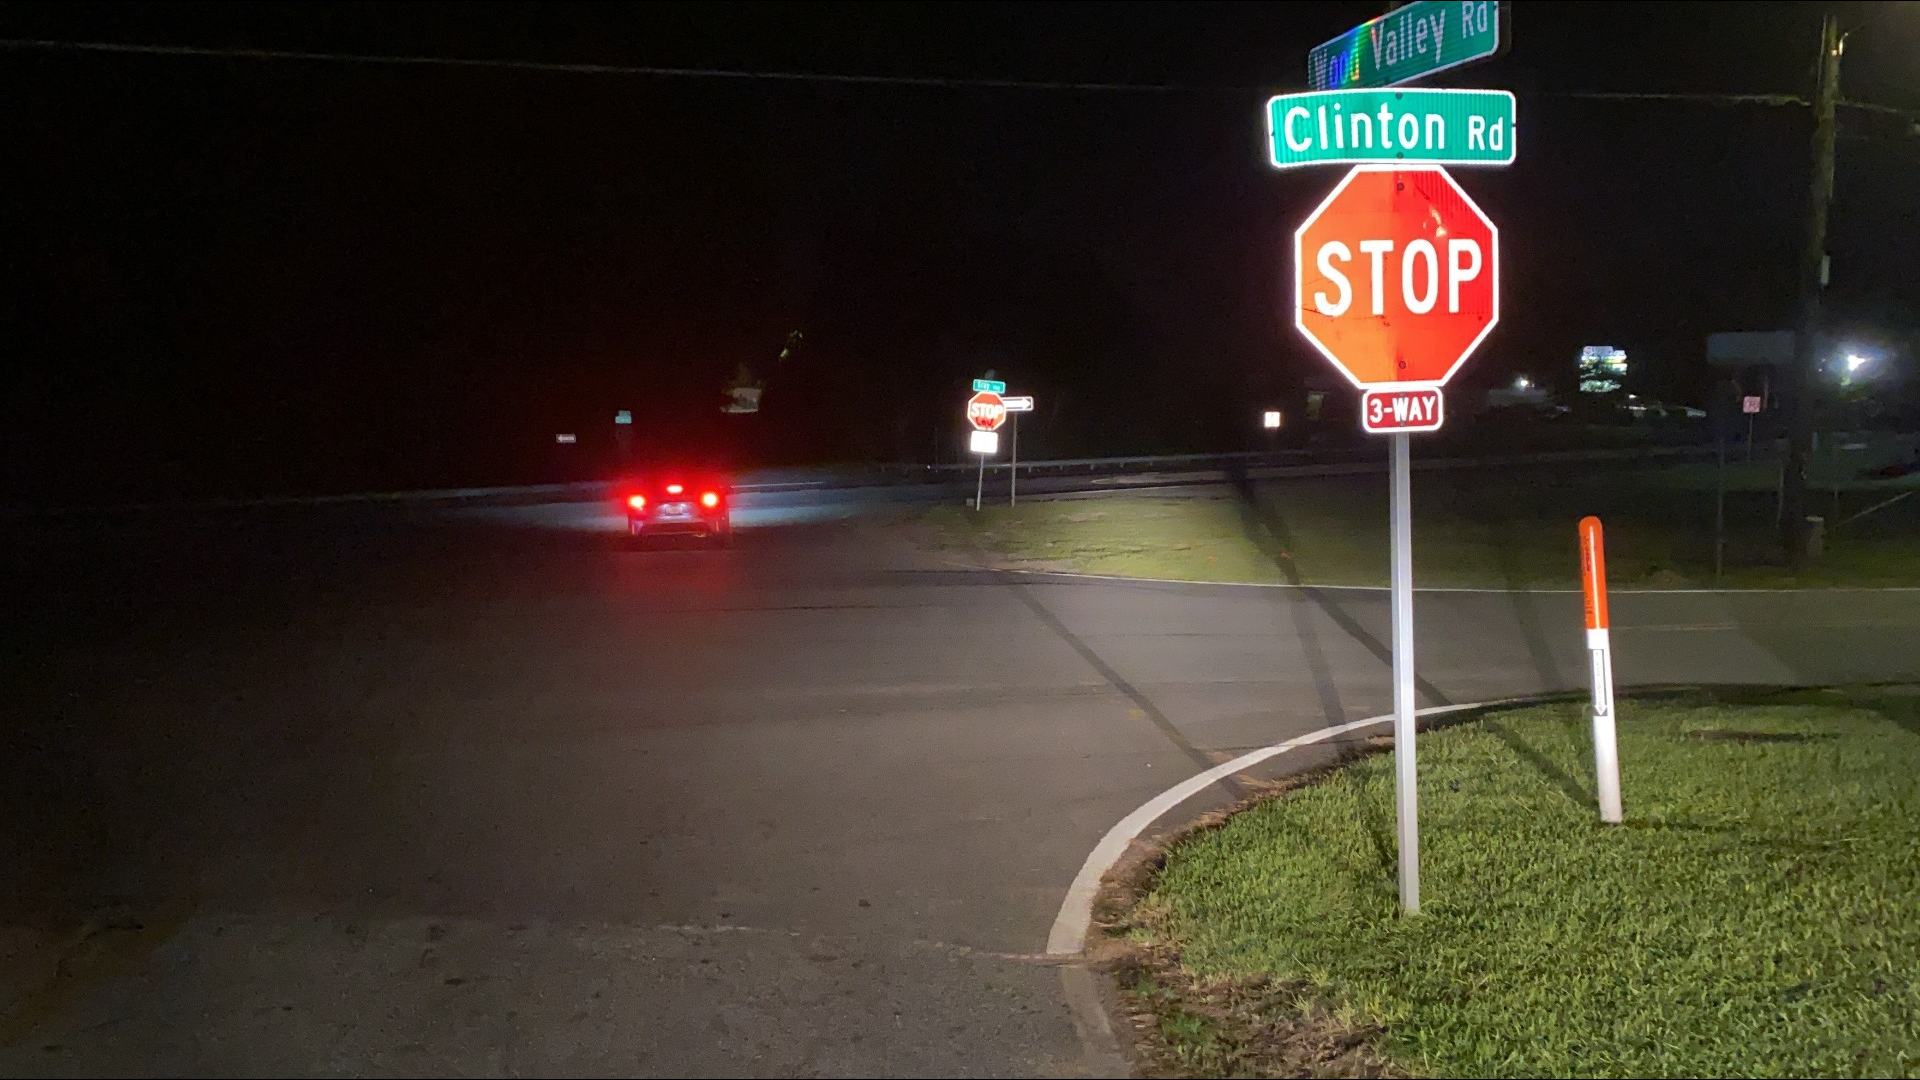 65-year-old Irene Stubbs was hit and killed on the 2000 block of Old Clinton Road just before 9:30 p.m. Friday.